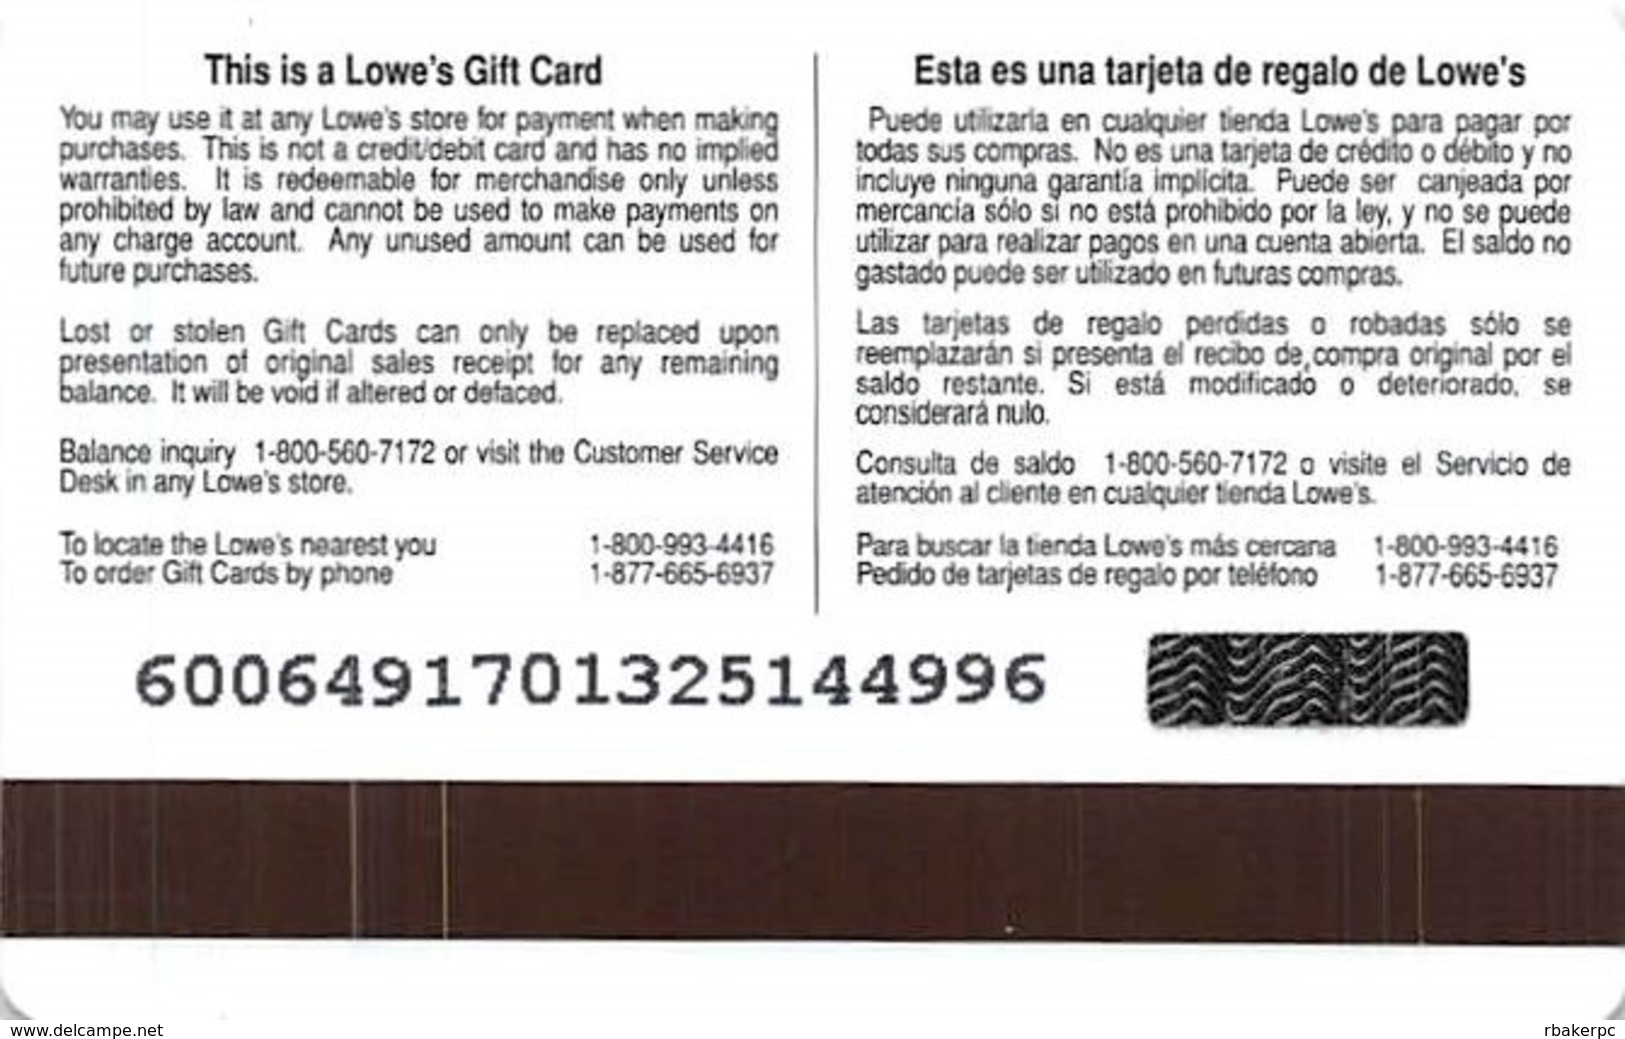 Lowes NCAA Gift Card - Tigers - Gift Cards